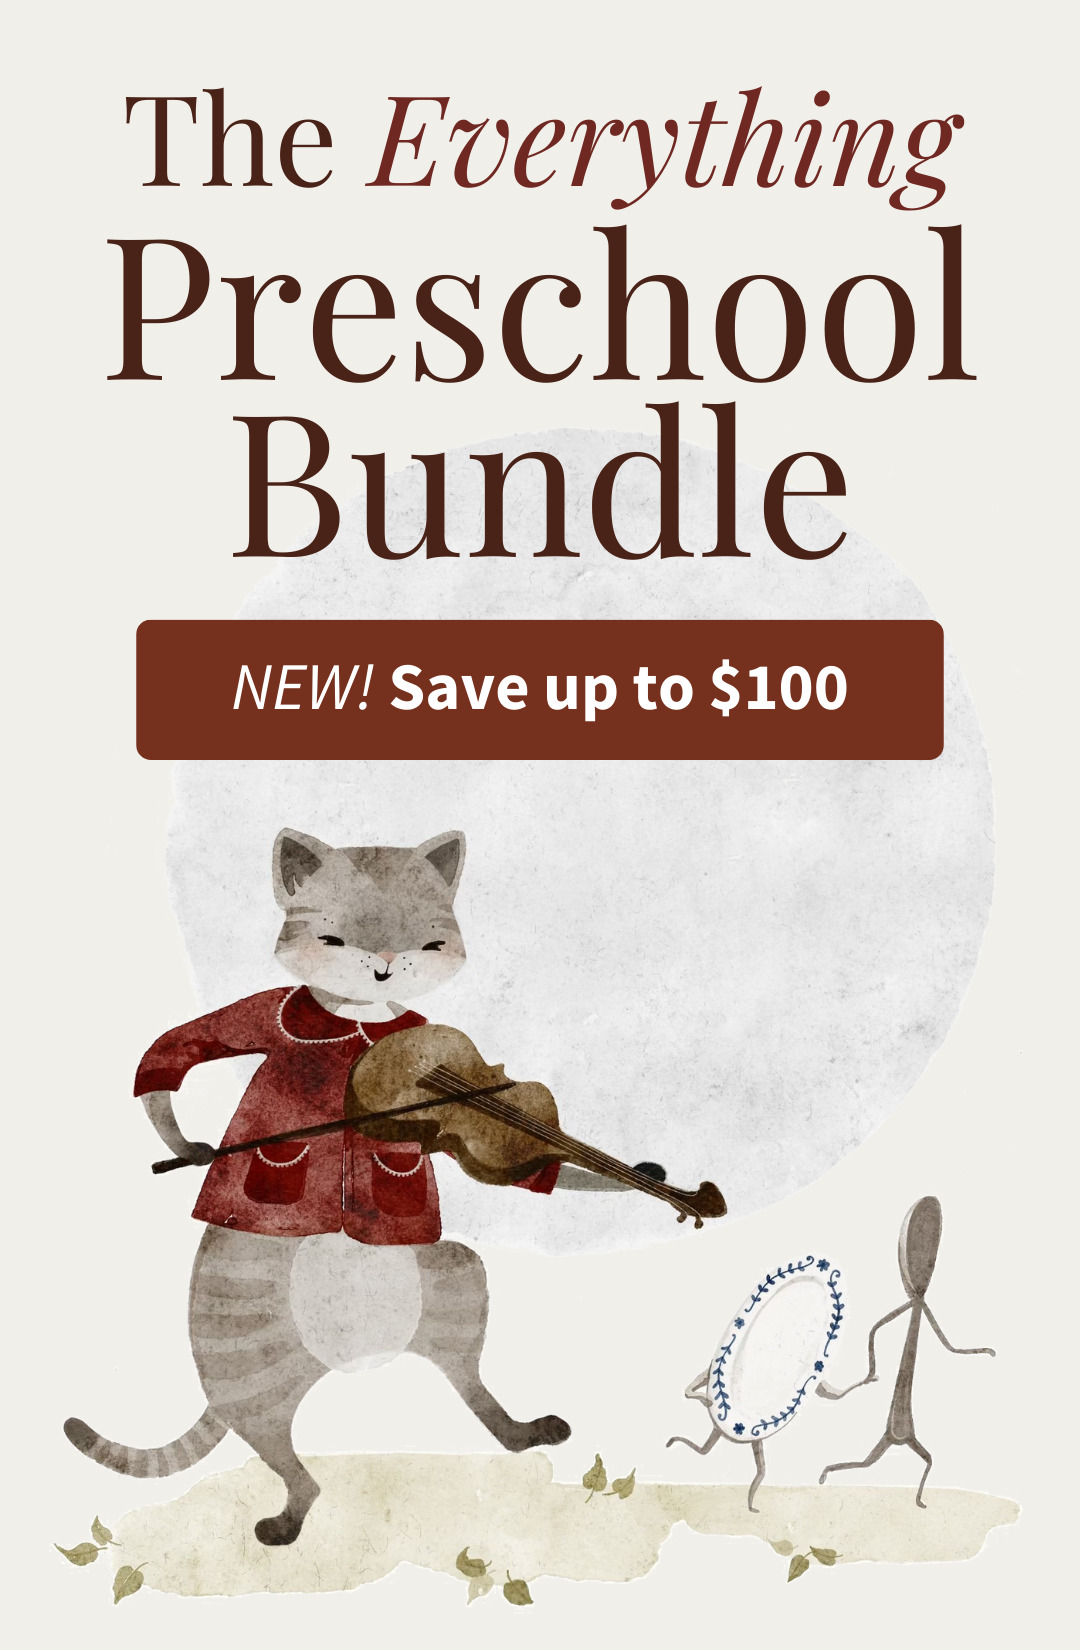 The Everything Preschool Bundle: NEW! Save up to $100